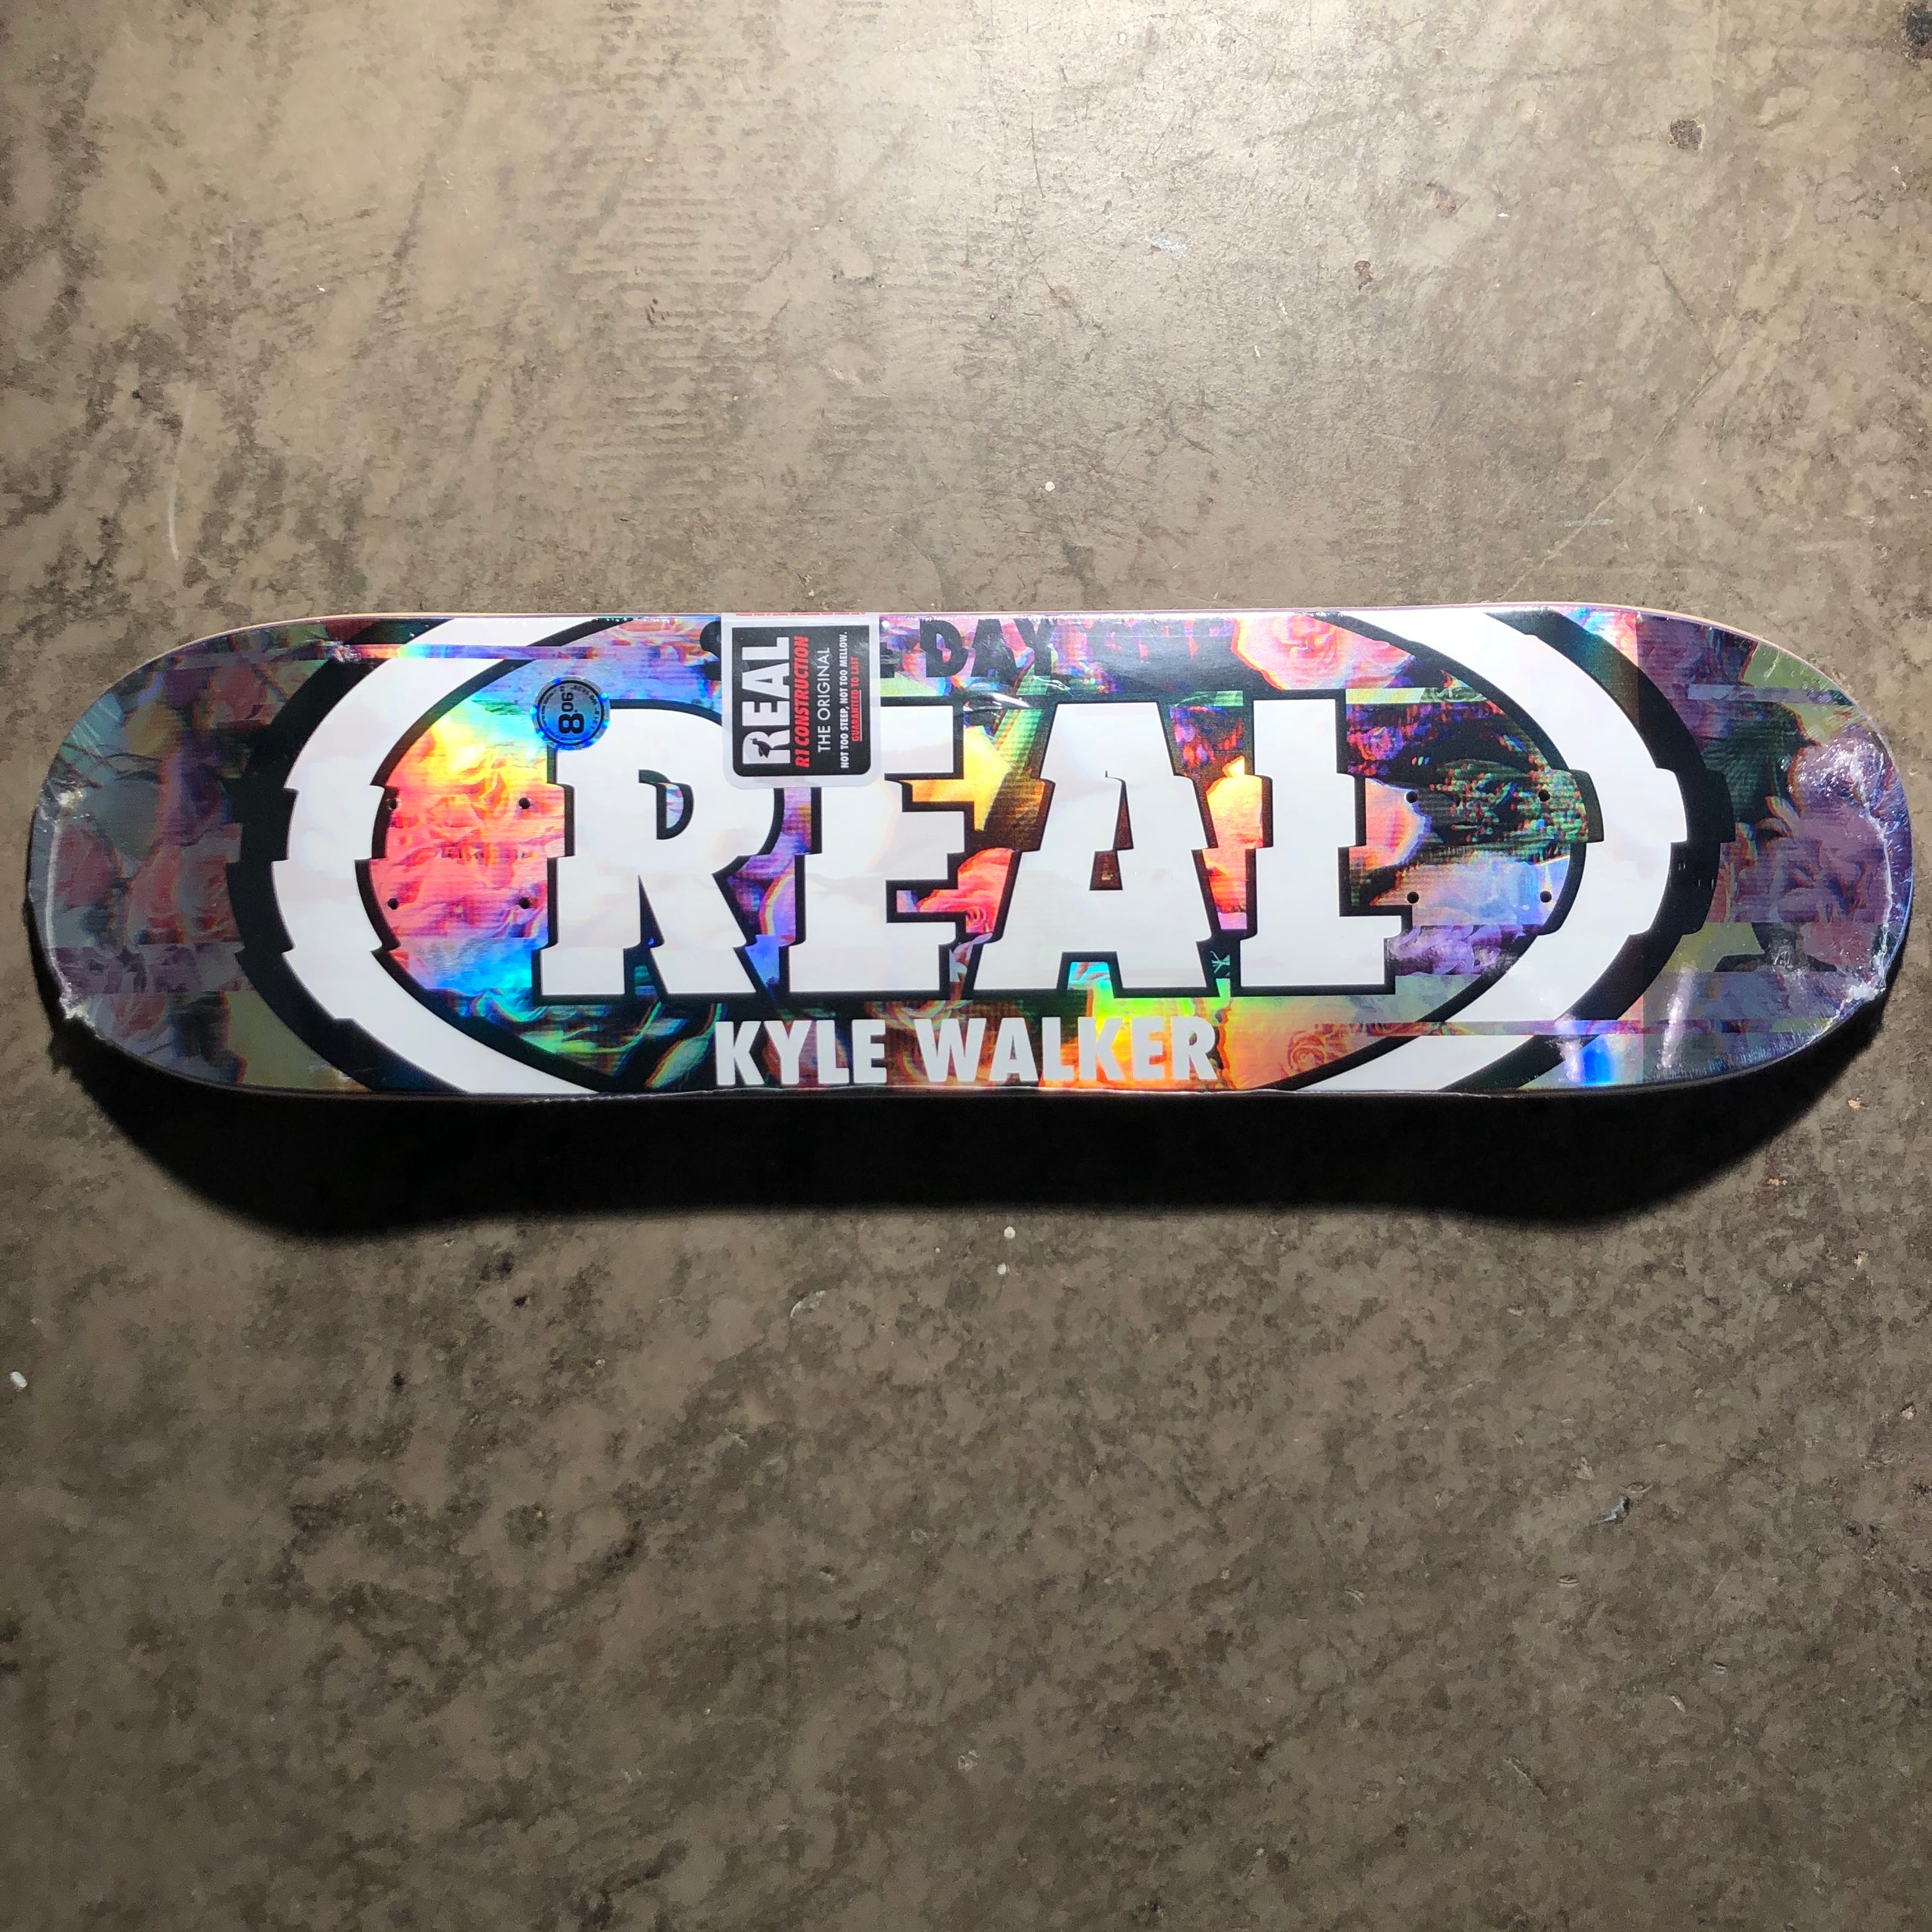 Real Kyle Walker Glitch Oval 8 06 The Block Skate Supply